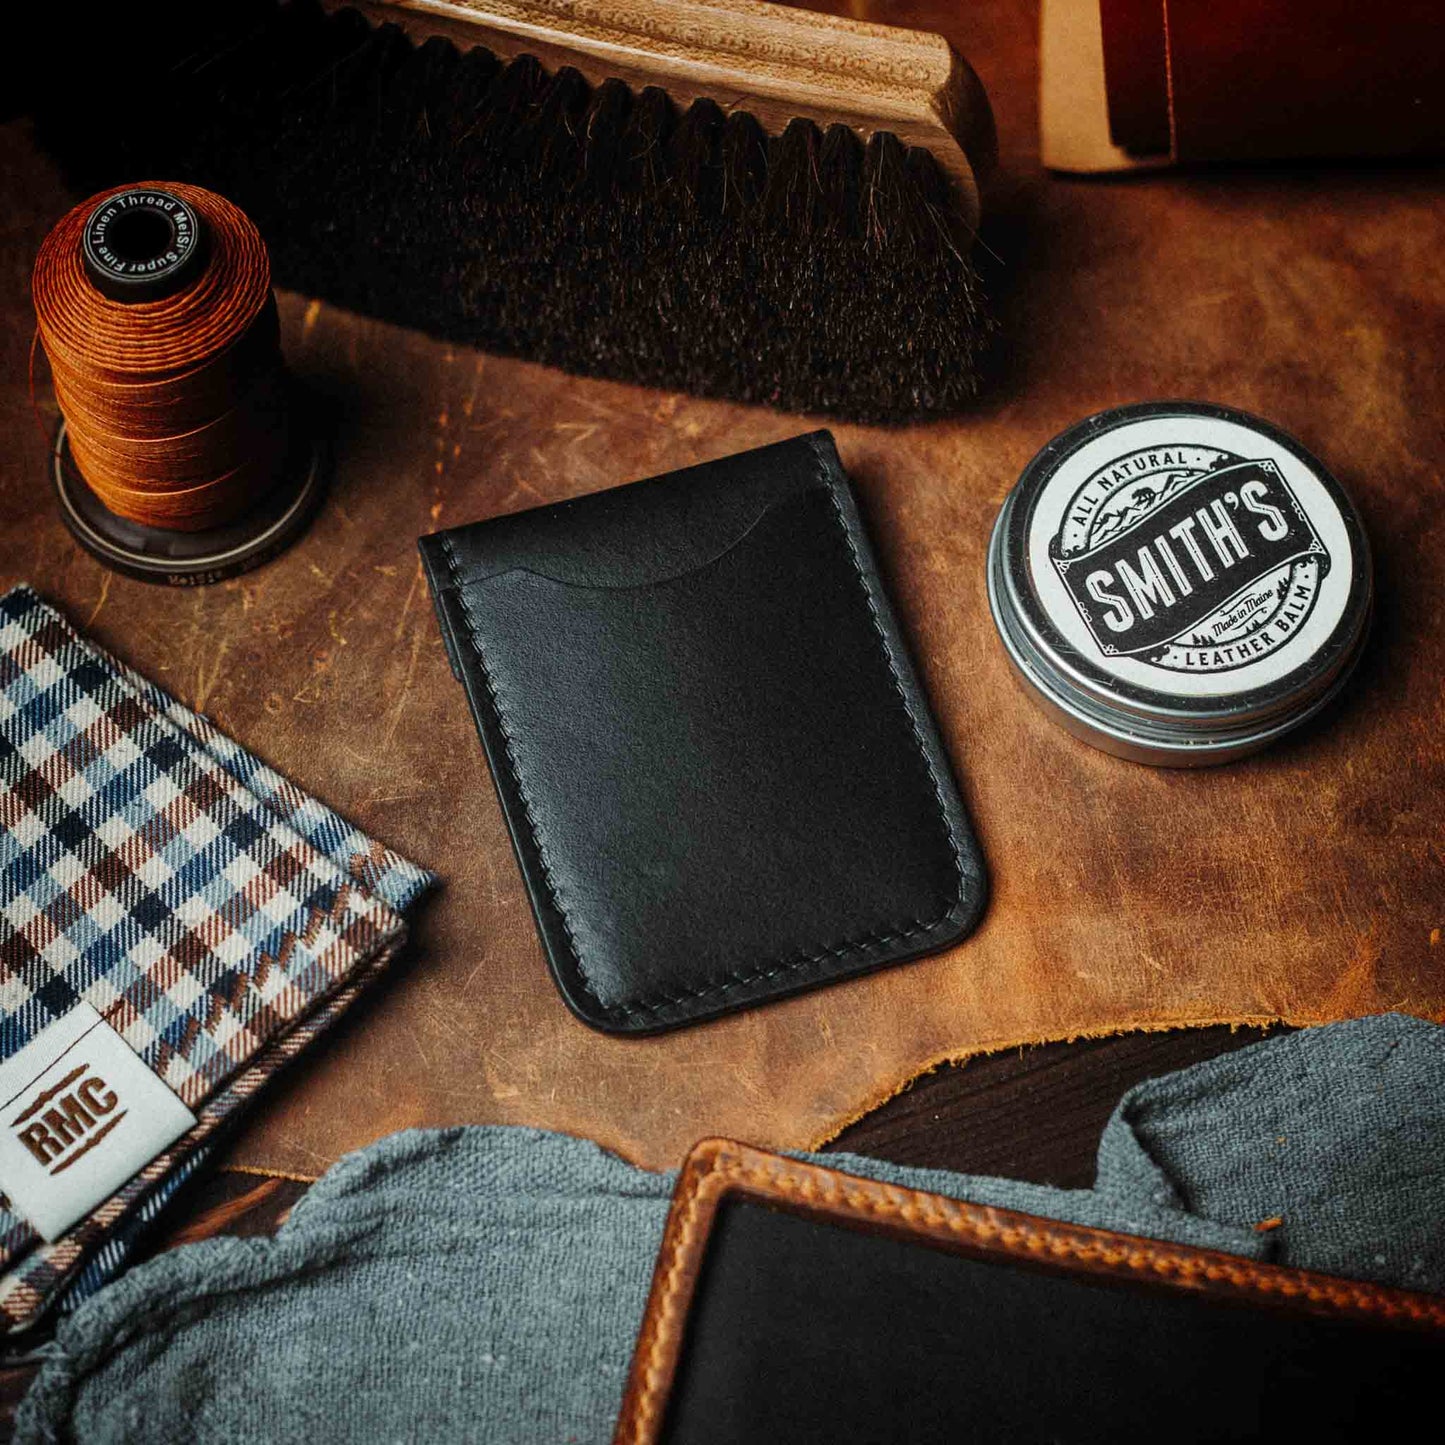 Wallet thread - what are you carrying?